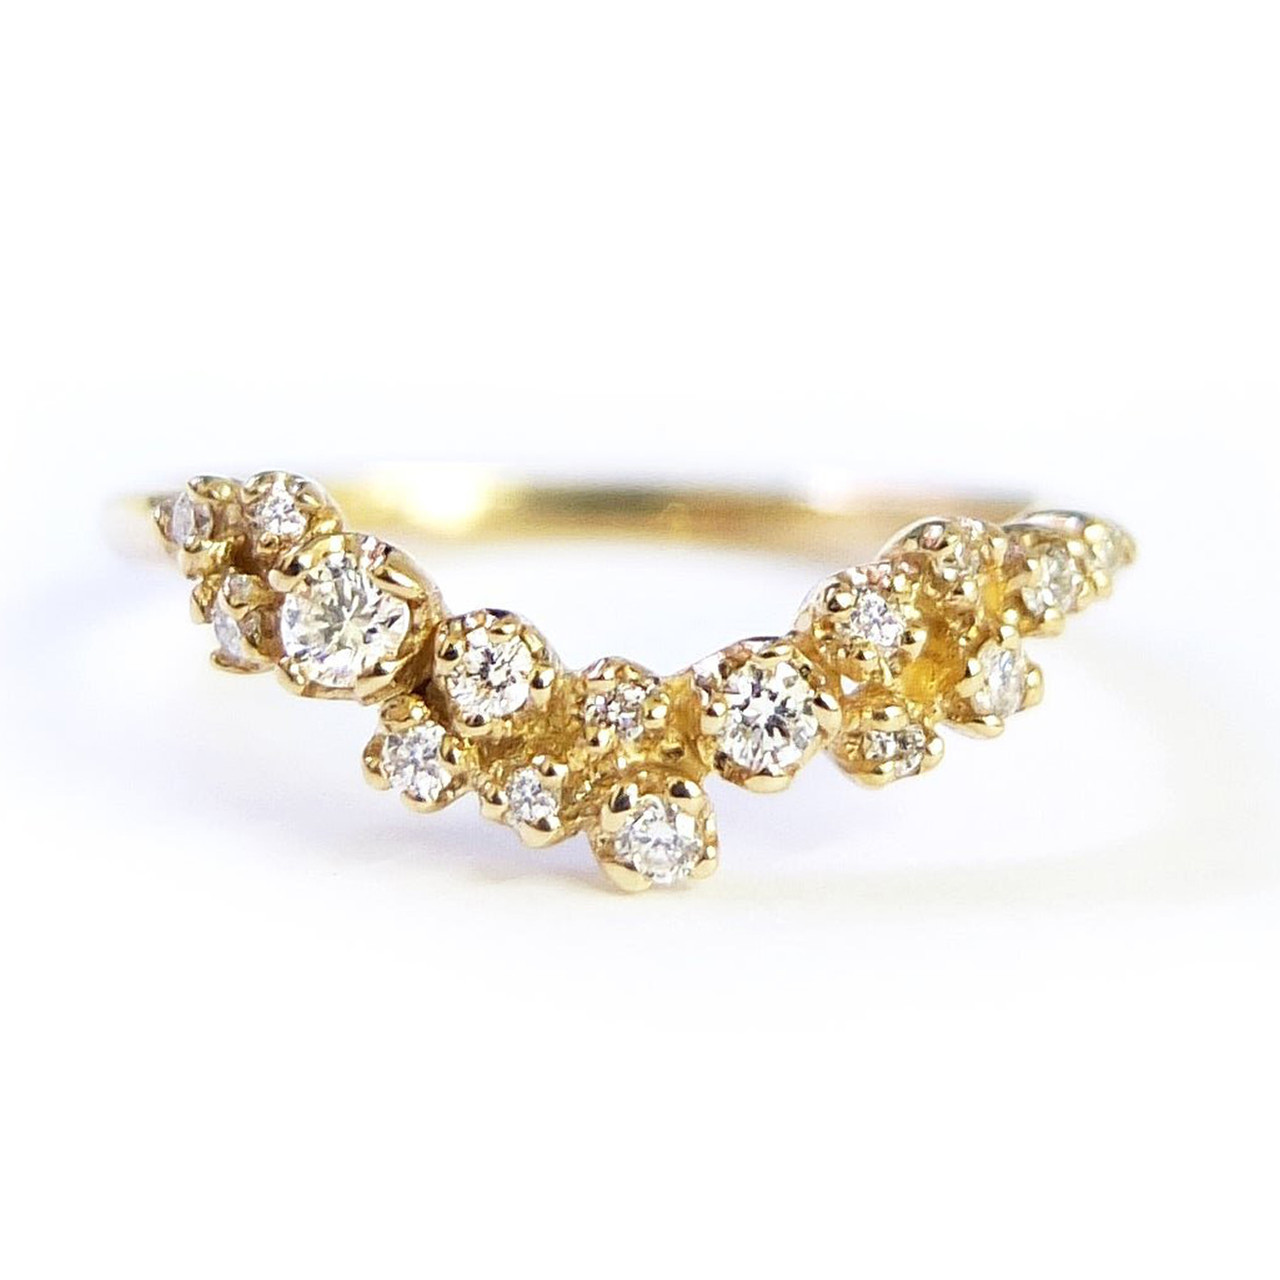 Curved Grand Cluster Ring - Tomfoolery London